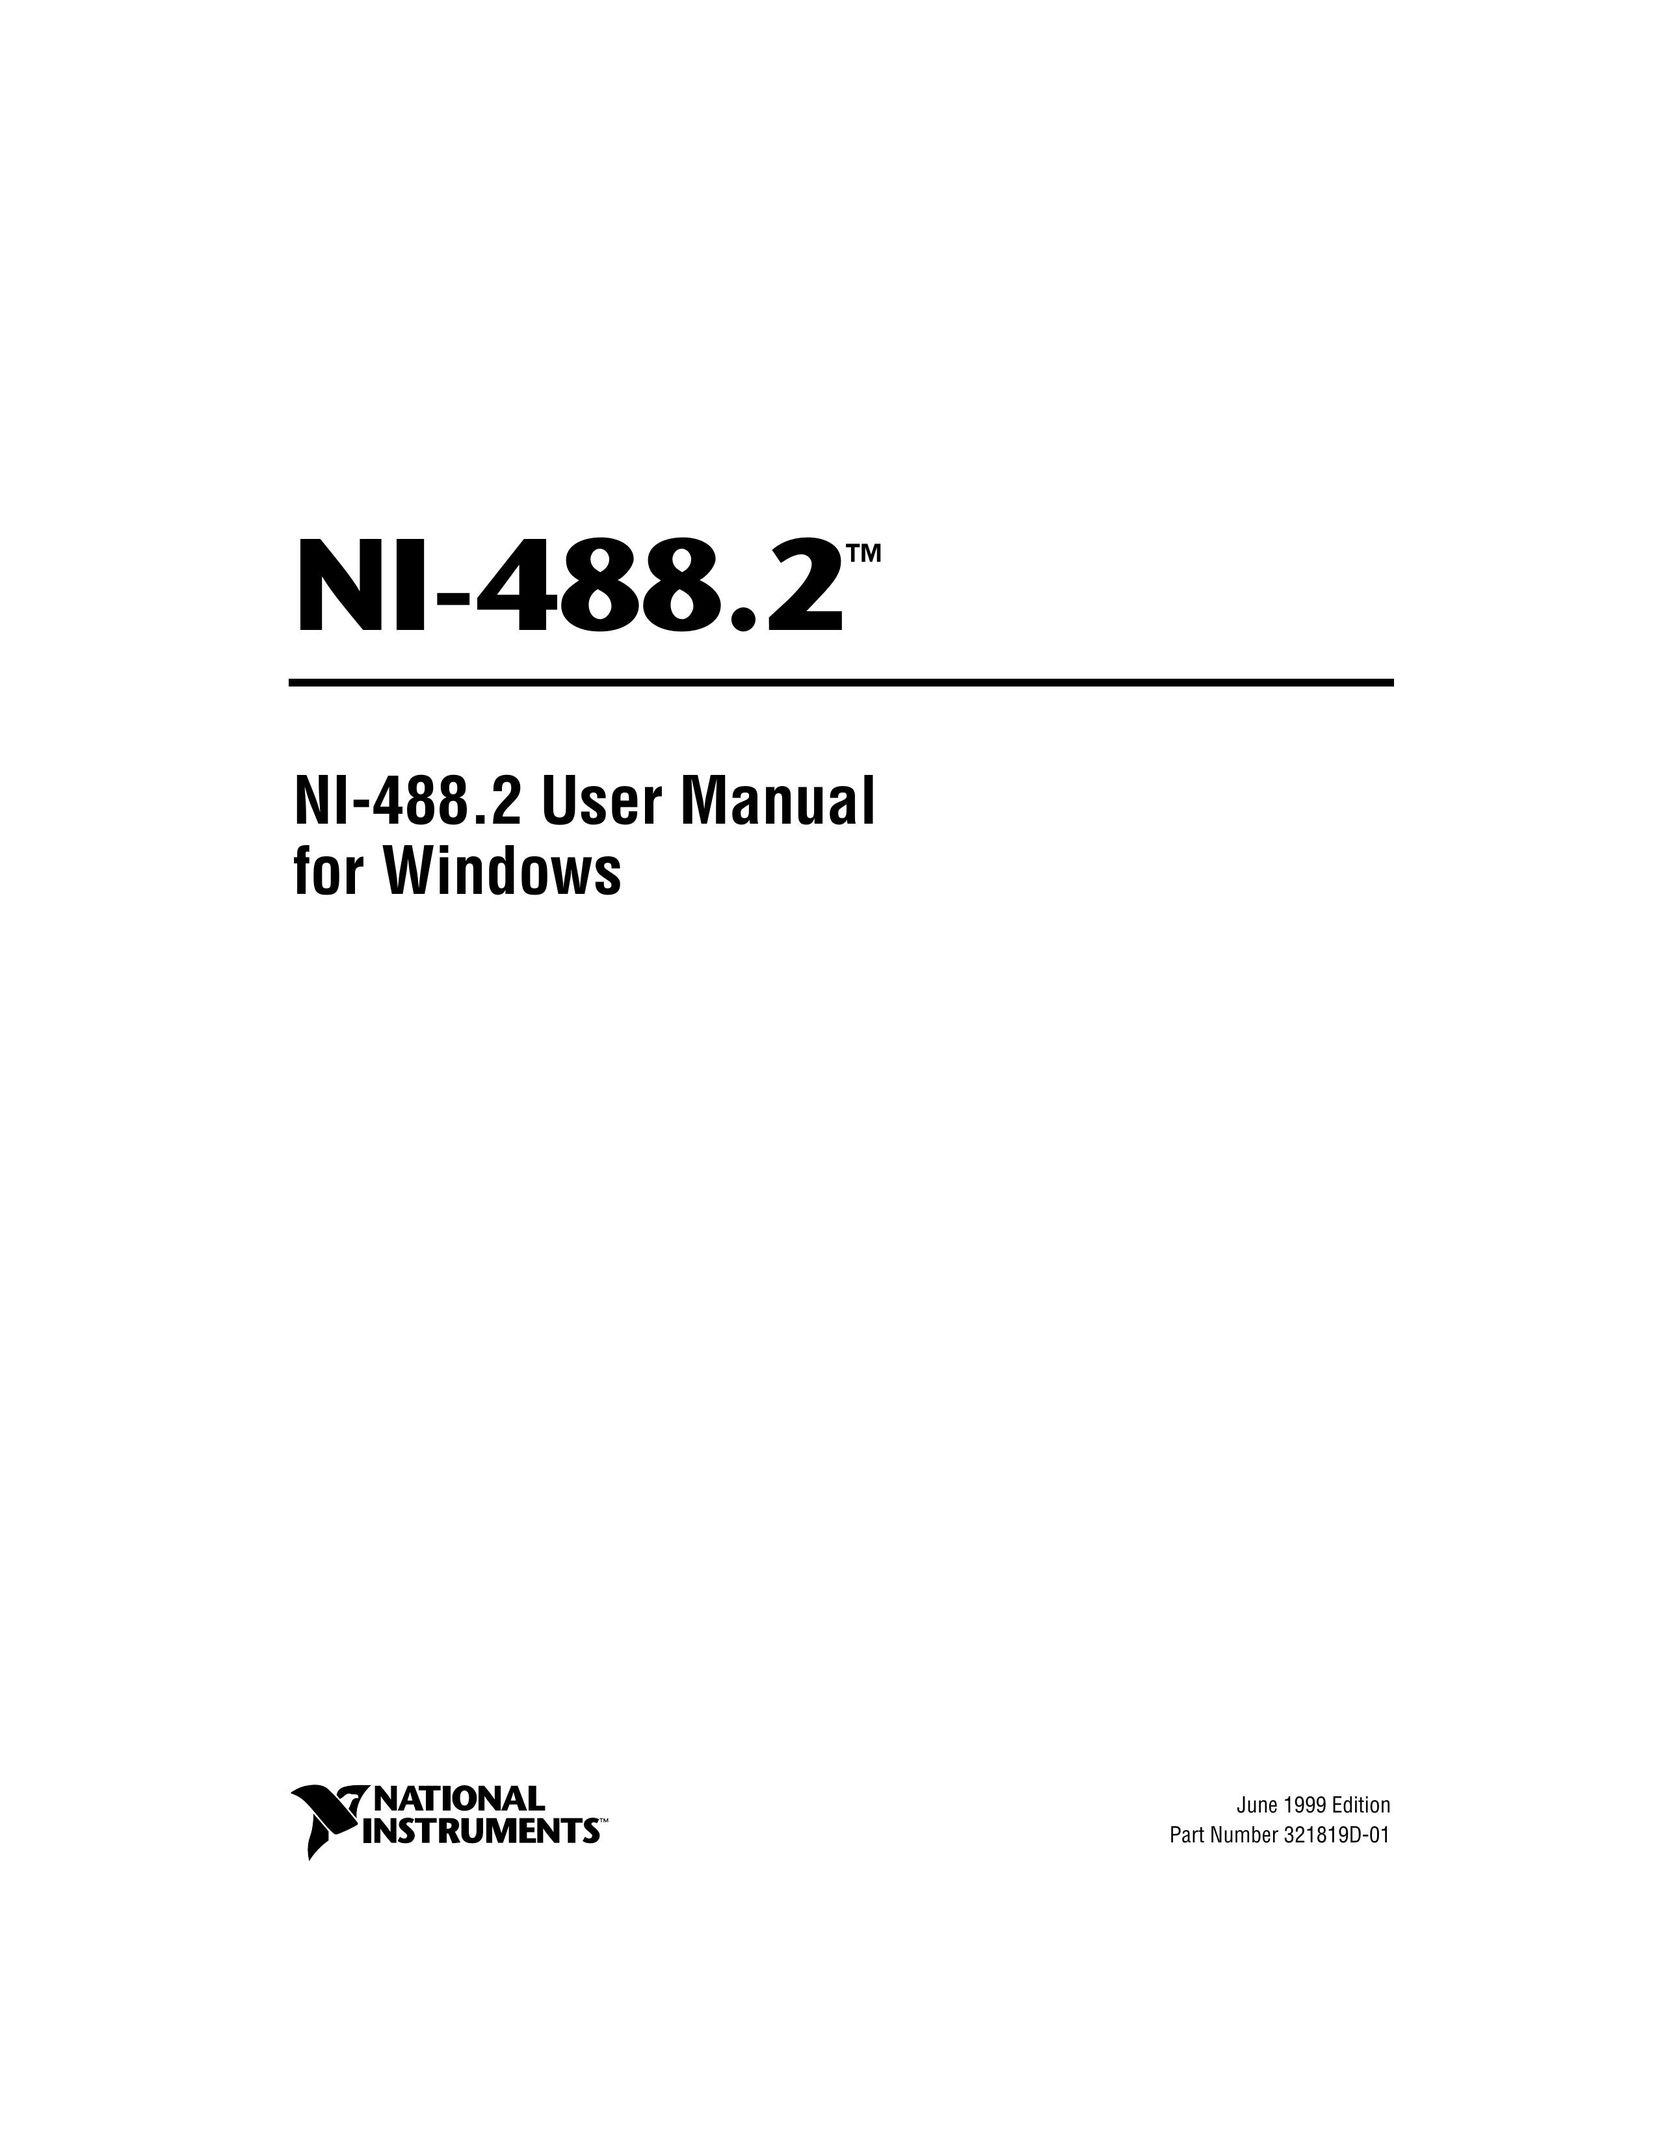 National Instruments NI-488.2 Switch User Manual